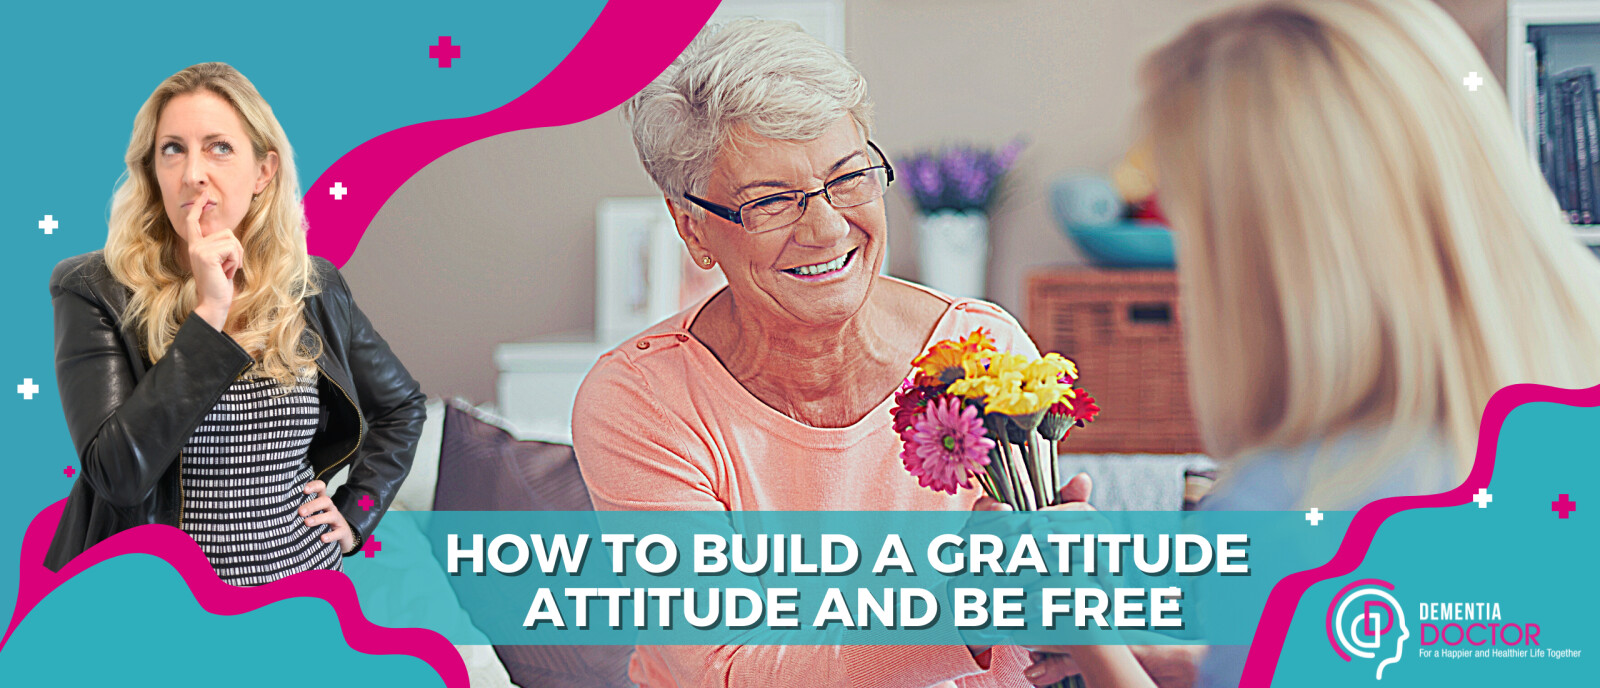 How to build a gratitude attitude and be free right now